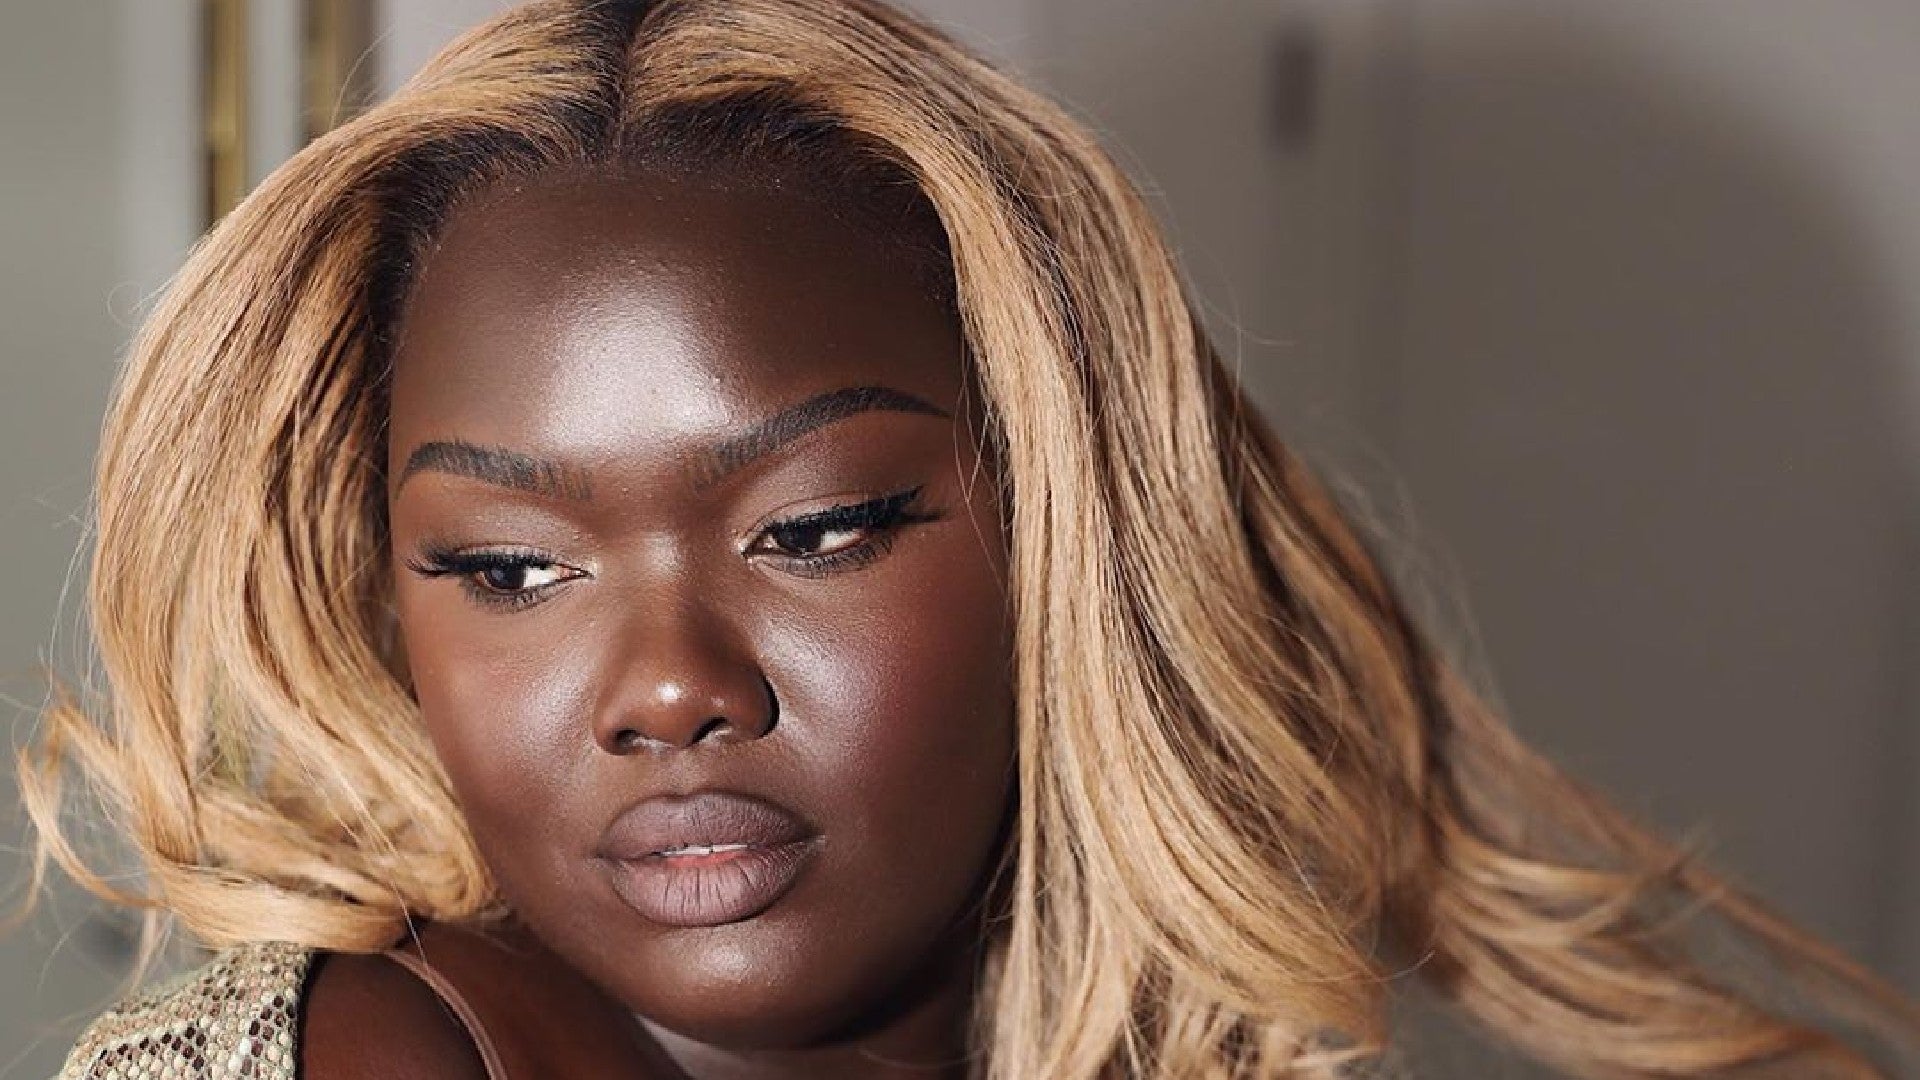 Our Favorite Beauty Influencers Make Quarantine Look Gorgeous